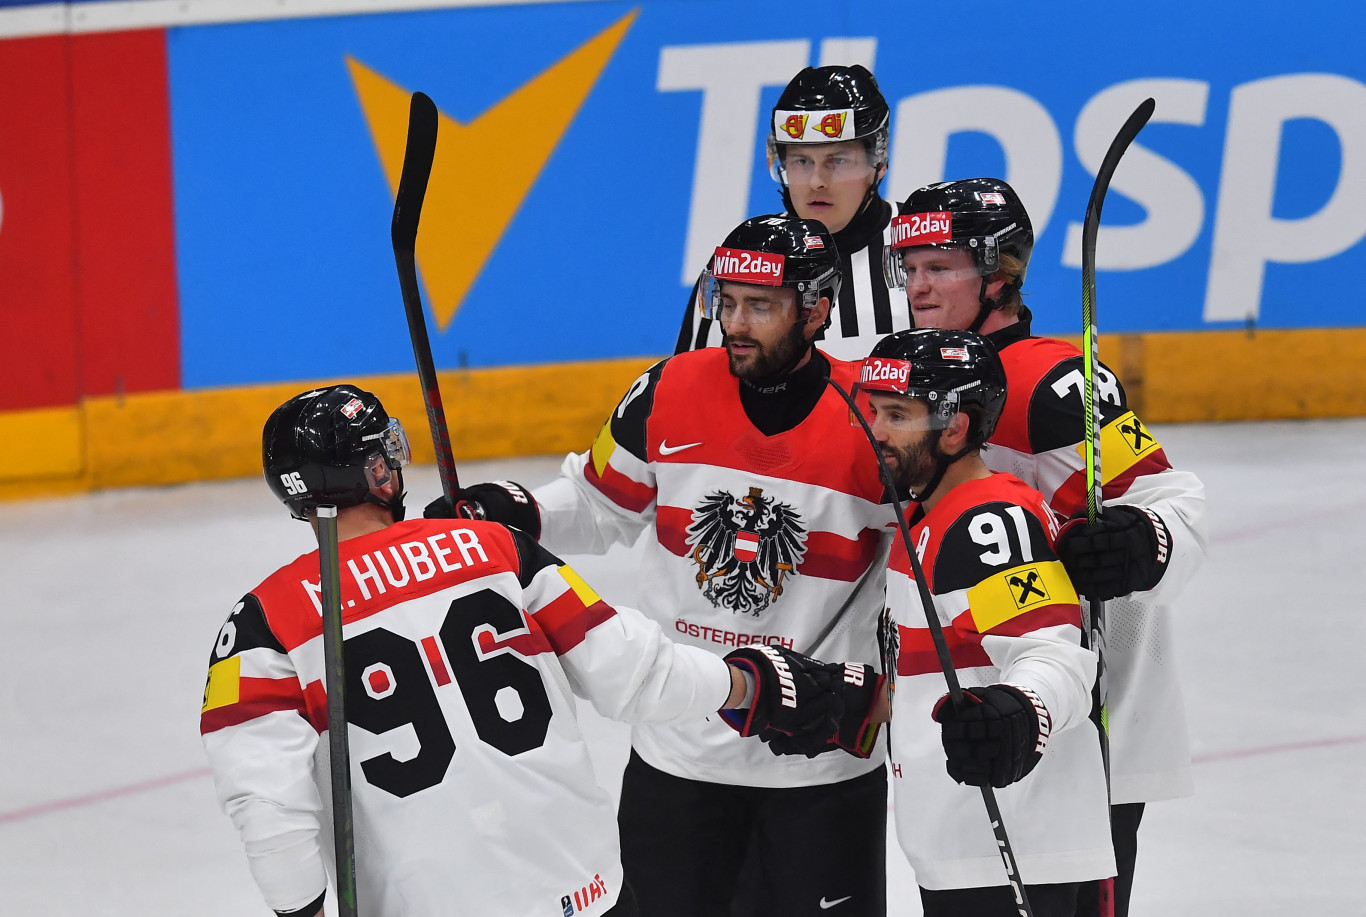 Austria produced the most impressive third ever against Canada in the World Cup of Hockey